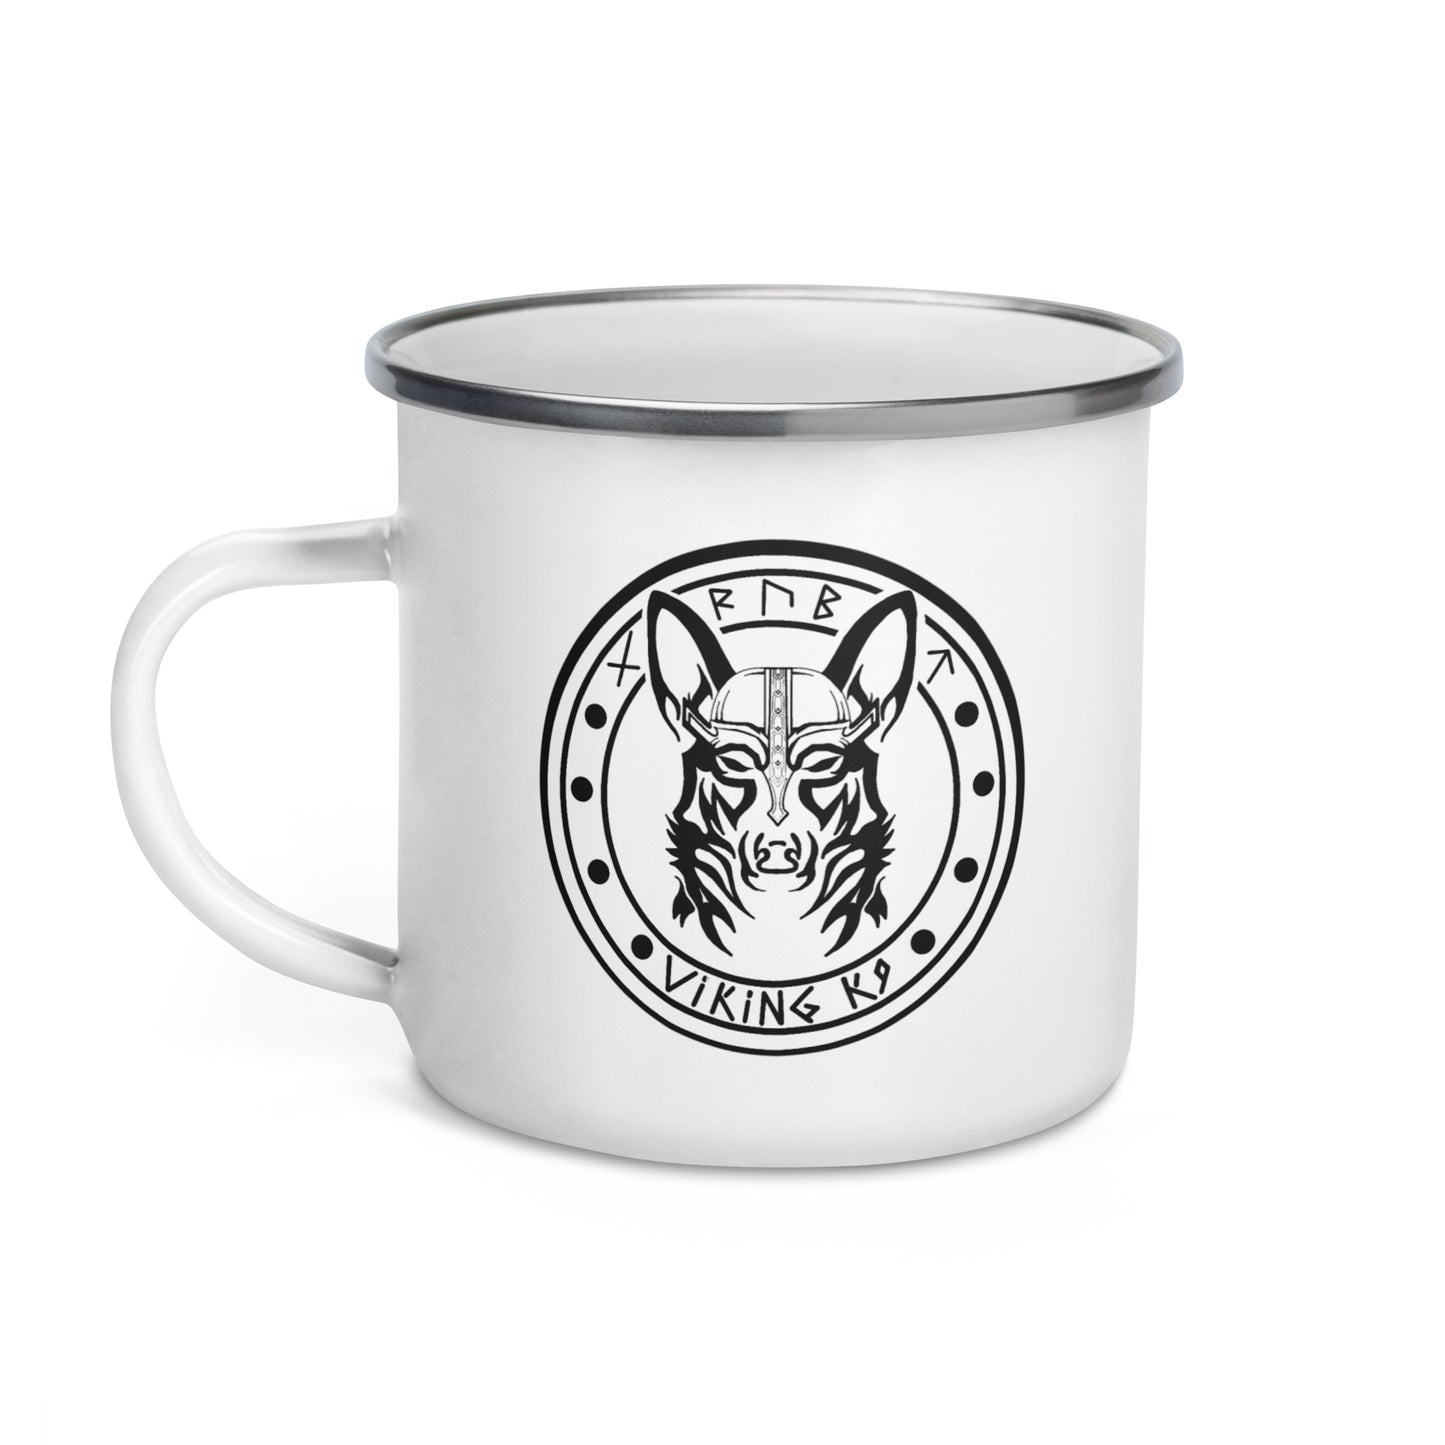 MUG "Dogs Are Dumb and Eat their Own S***"